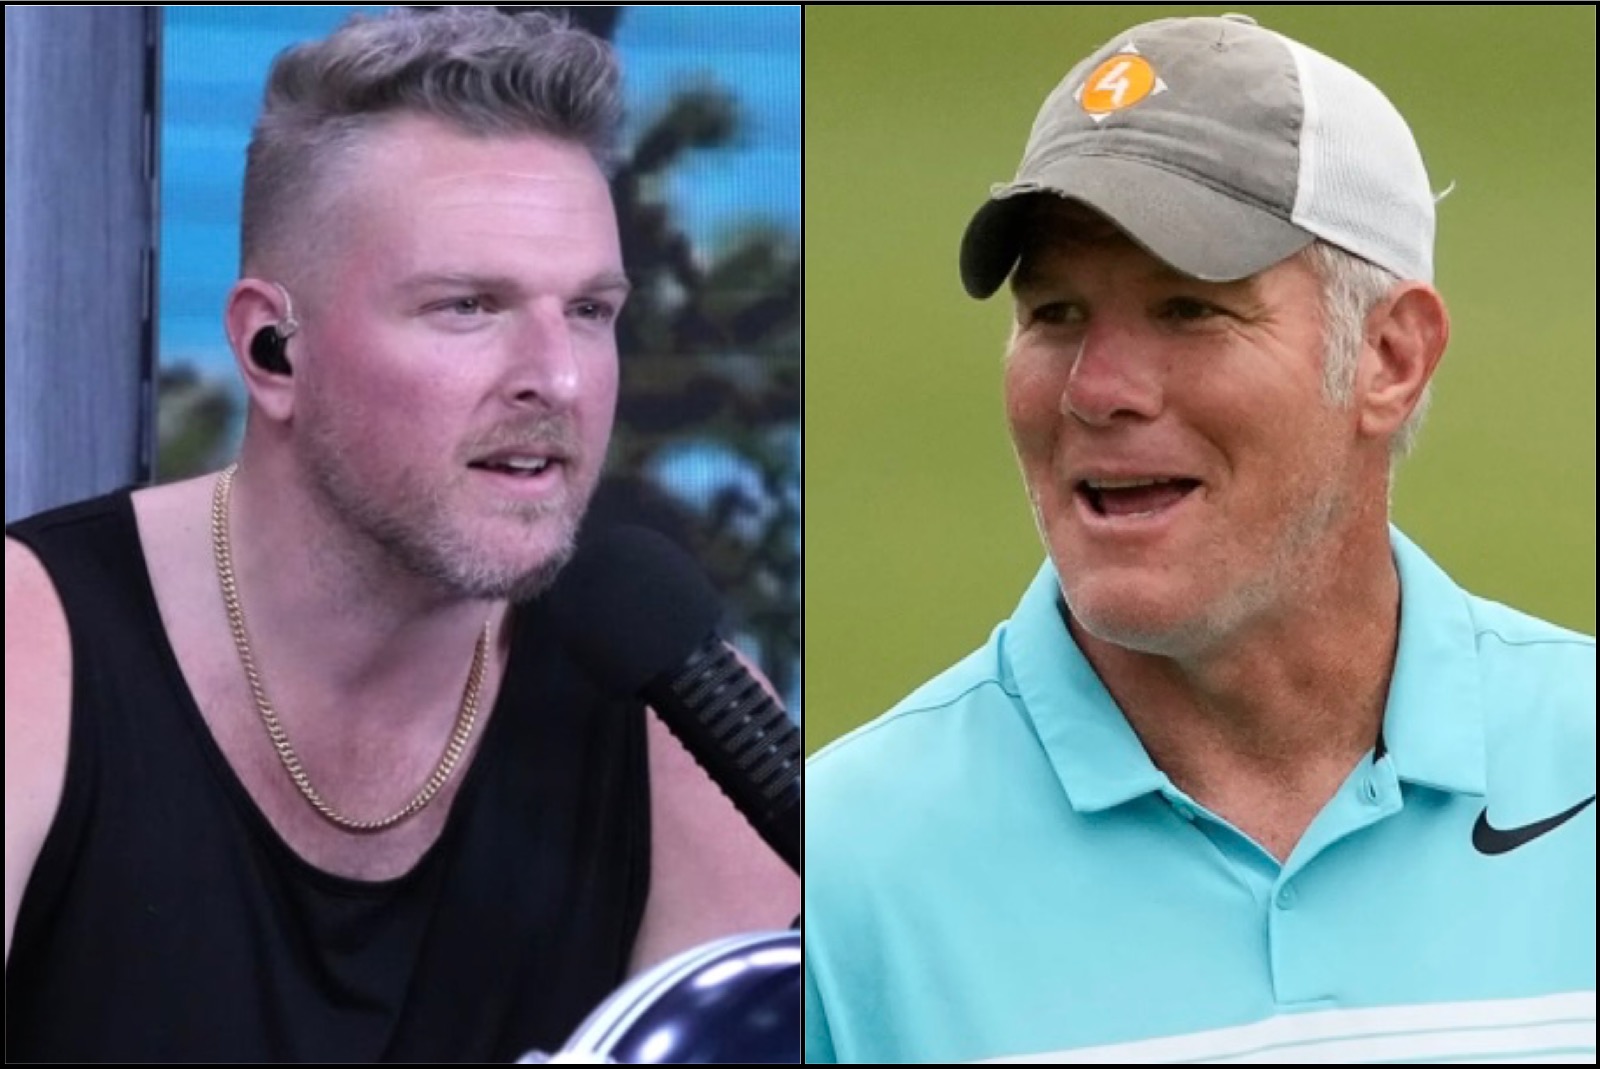 Brett Favre Drops Defamation Lawsuit Against Pat McAfee About Him Stealing from Poor People